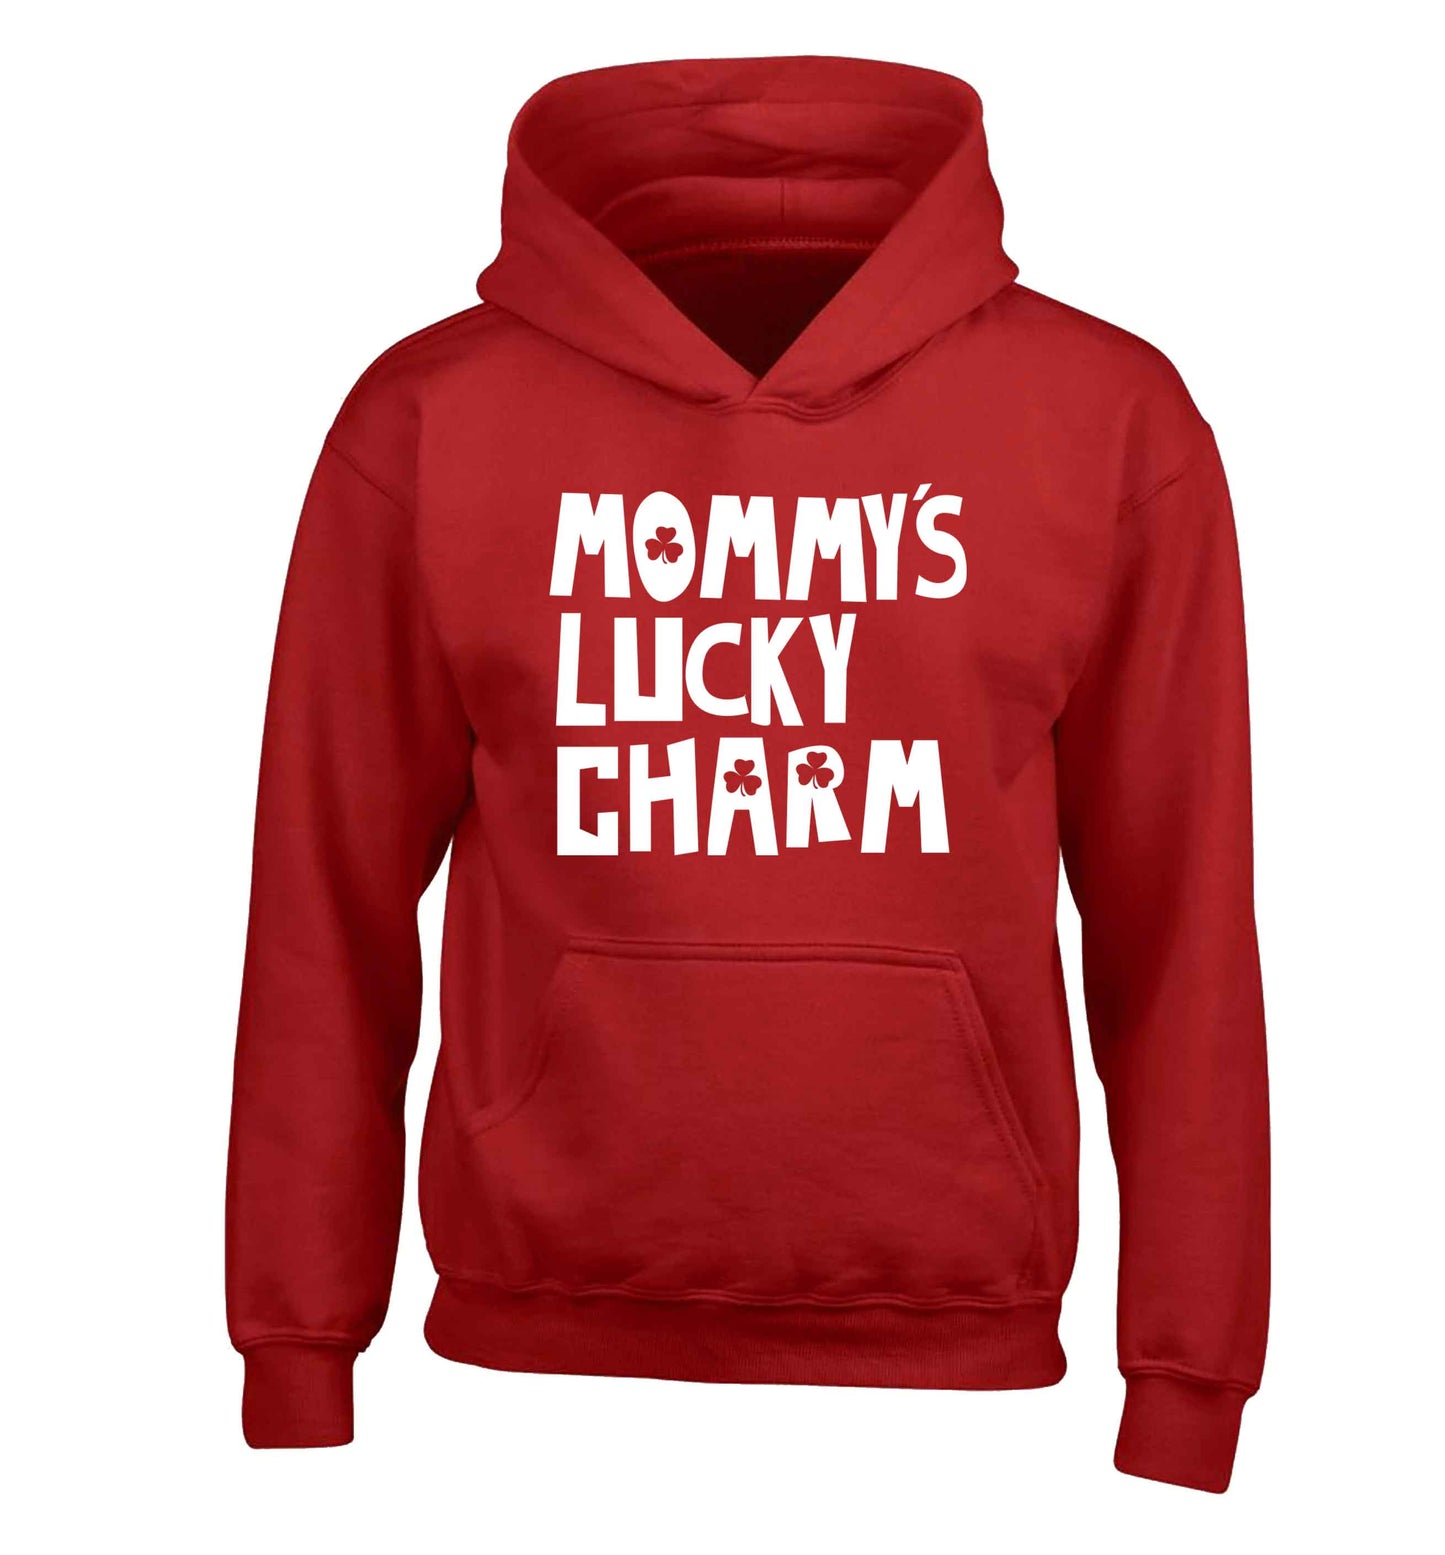 Mommy's lucky charm children's red hoodie 12-13 Years